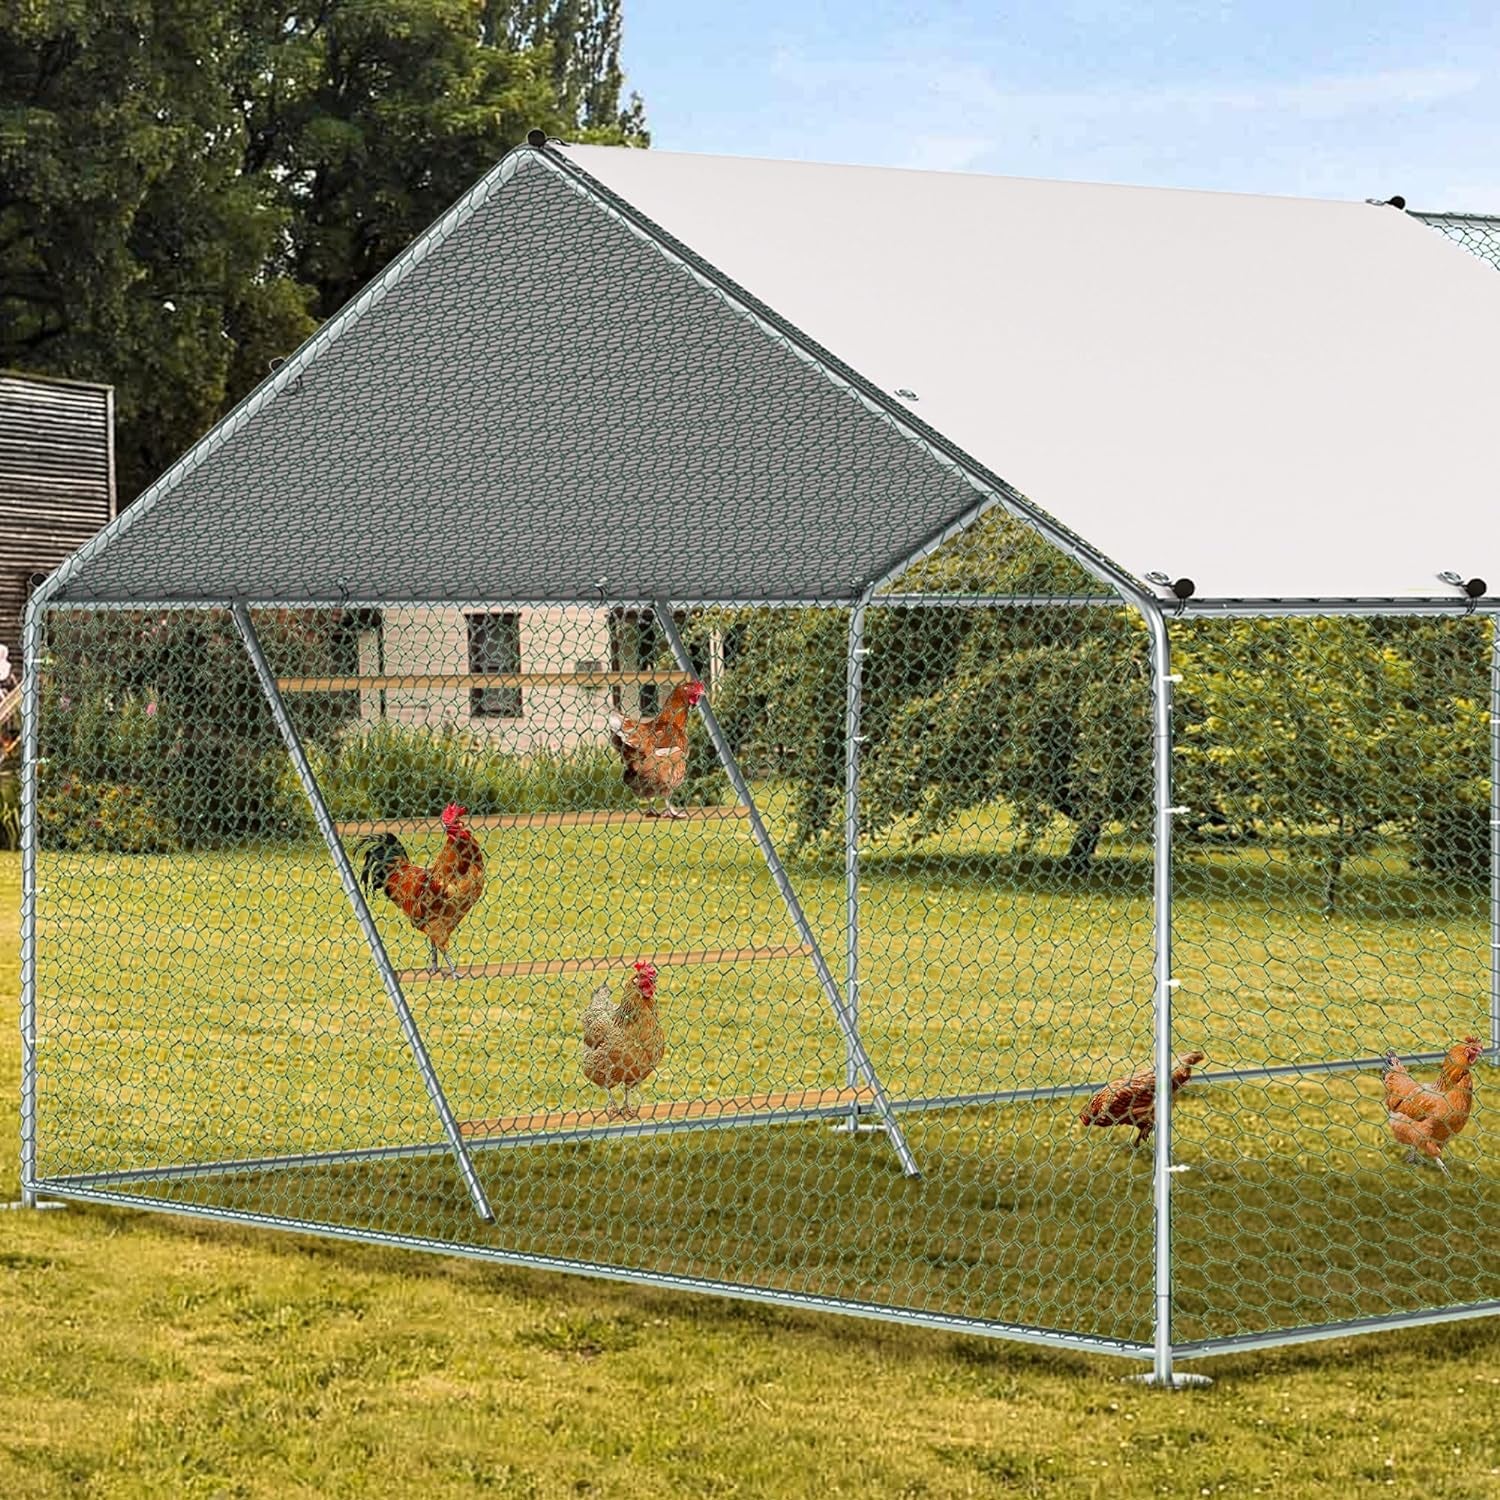 Chicken Coop Roosting Perch Essentials：Perfect for Backyard Poultry, Easy Installation &,Farm Roost Toys for Chickens (55' L X 40' W)